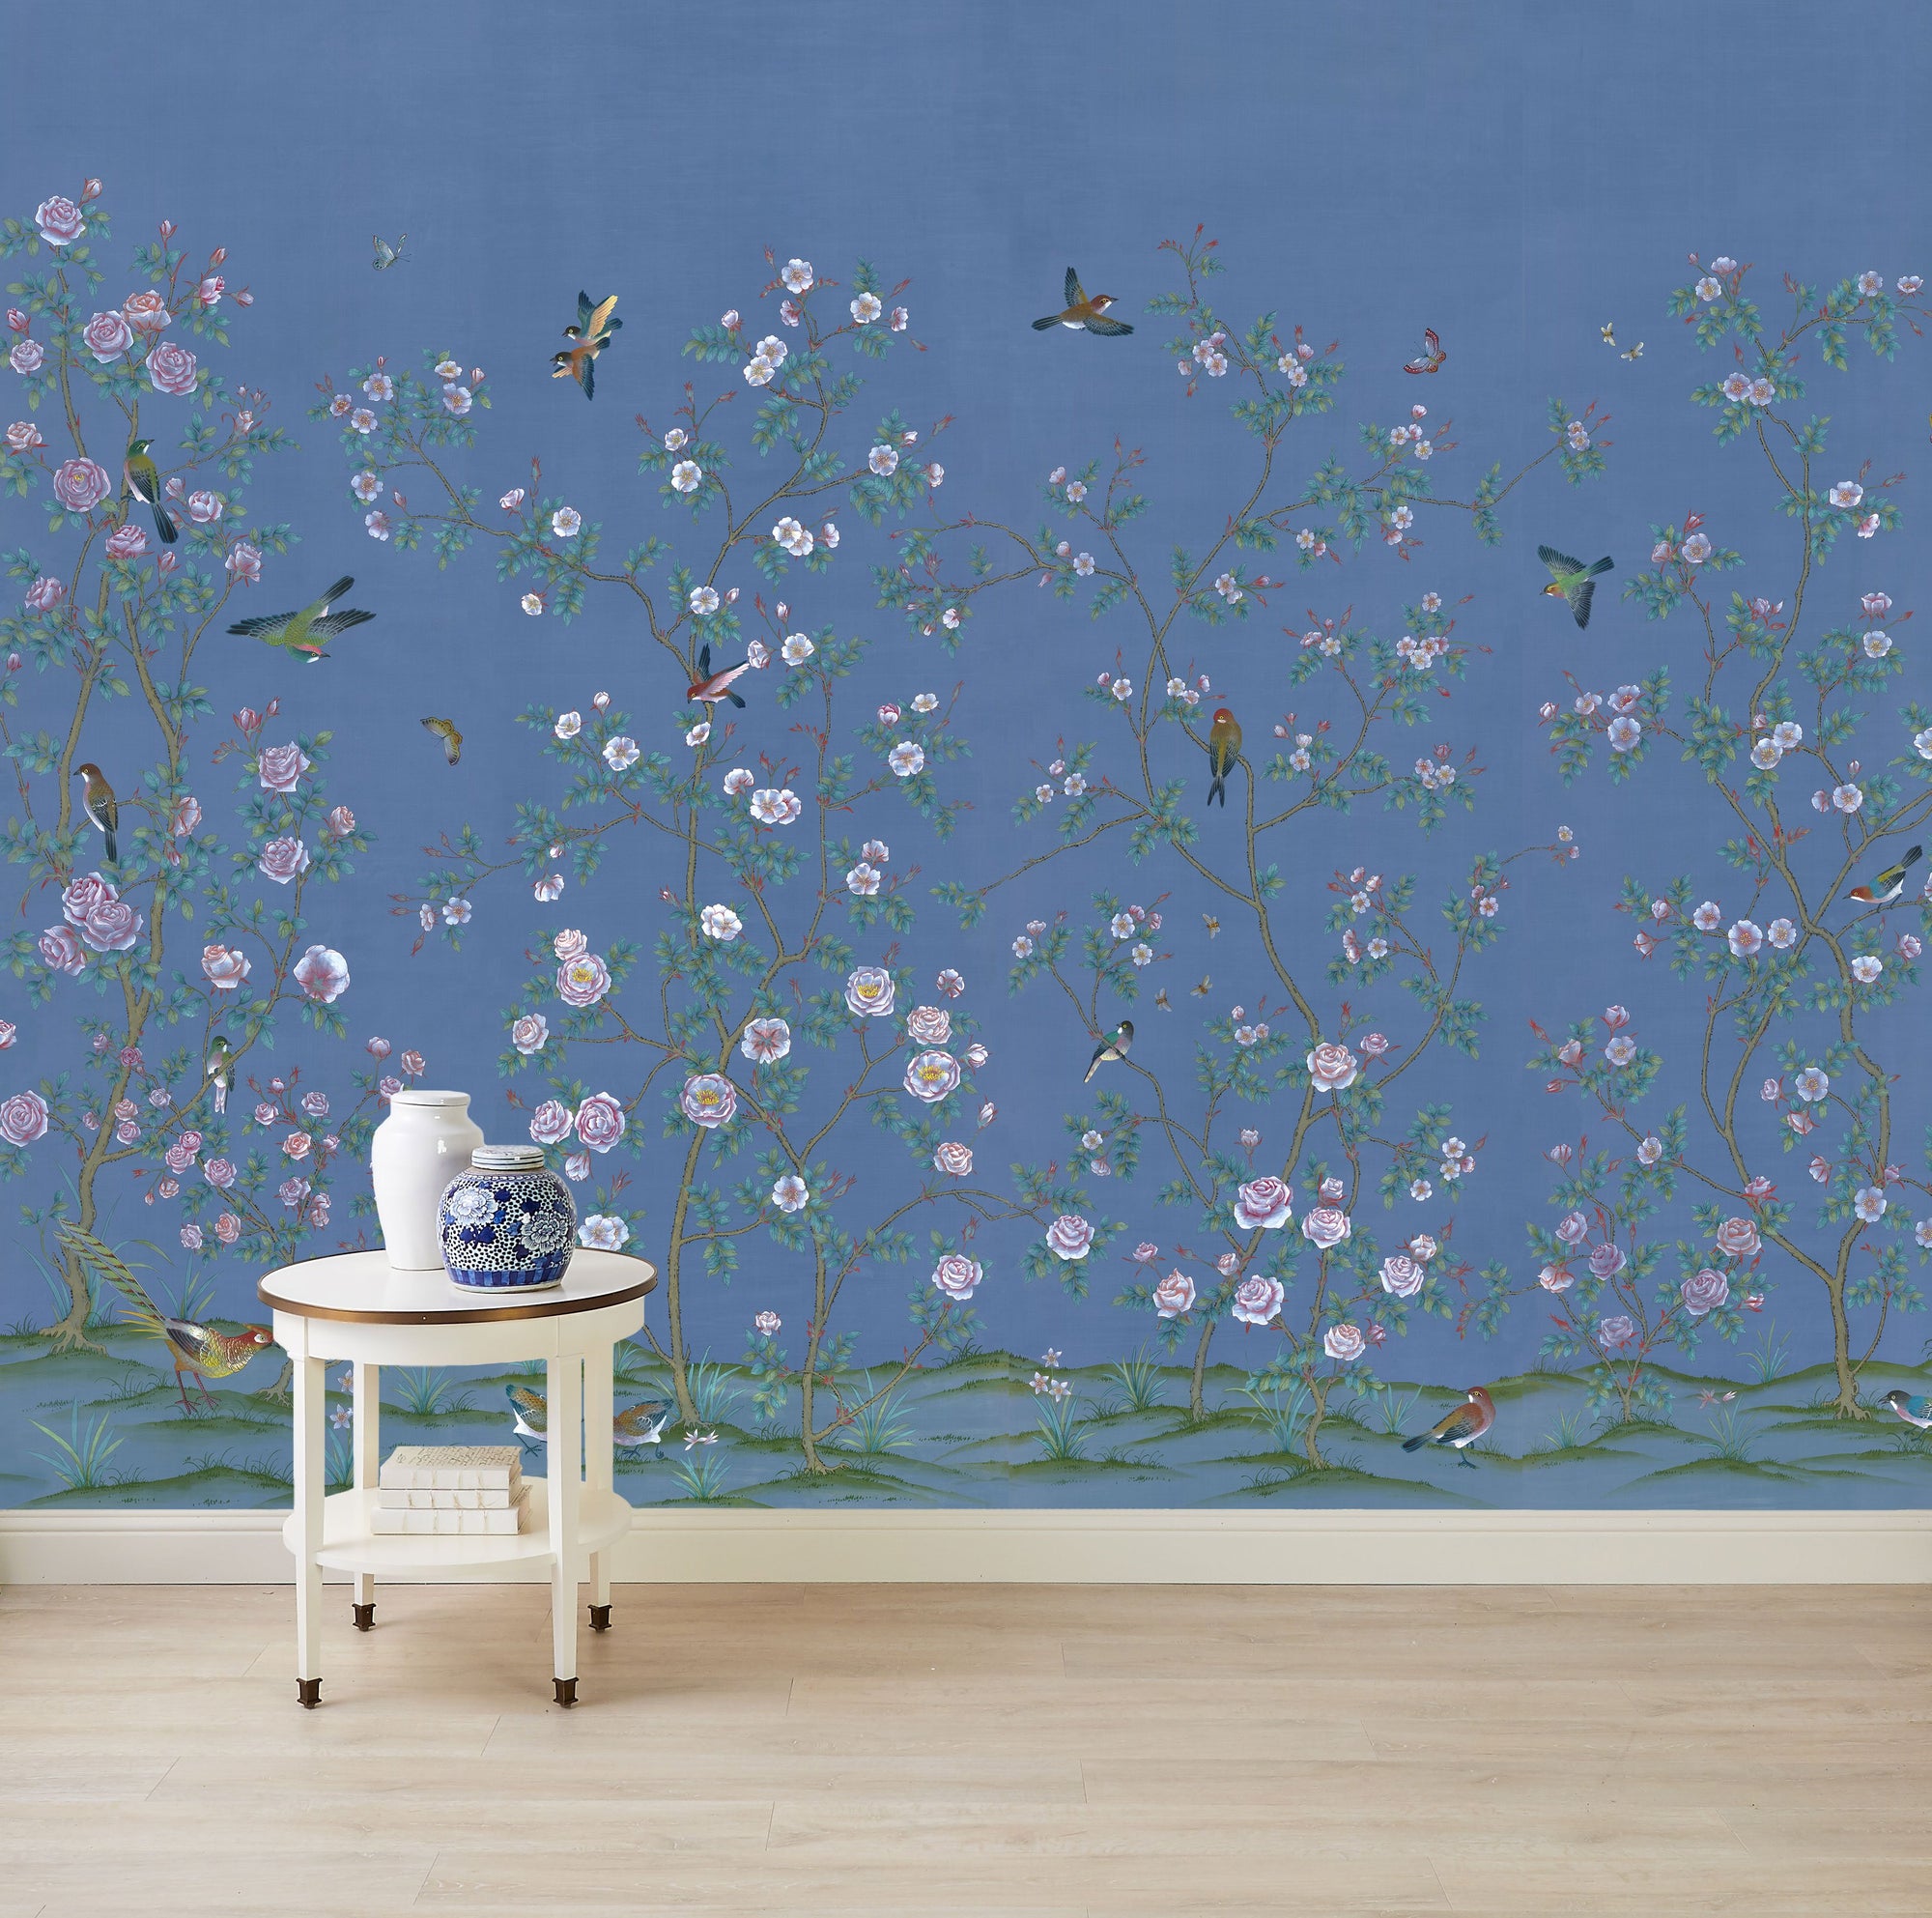 Full Mural of Chinoiserie Wallpaper in Blue Canterbury Design on Wall